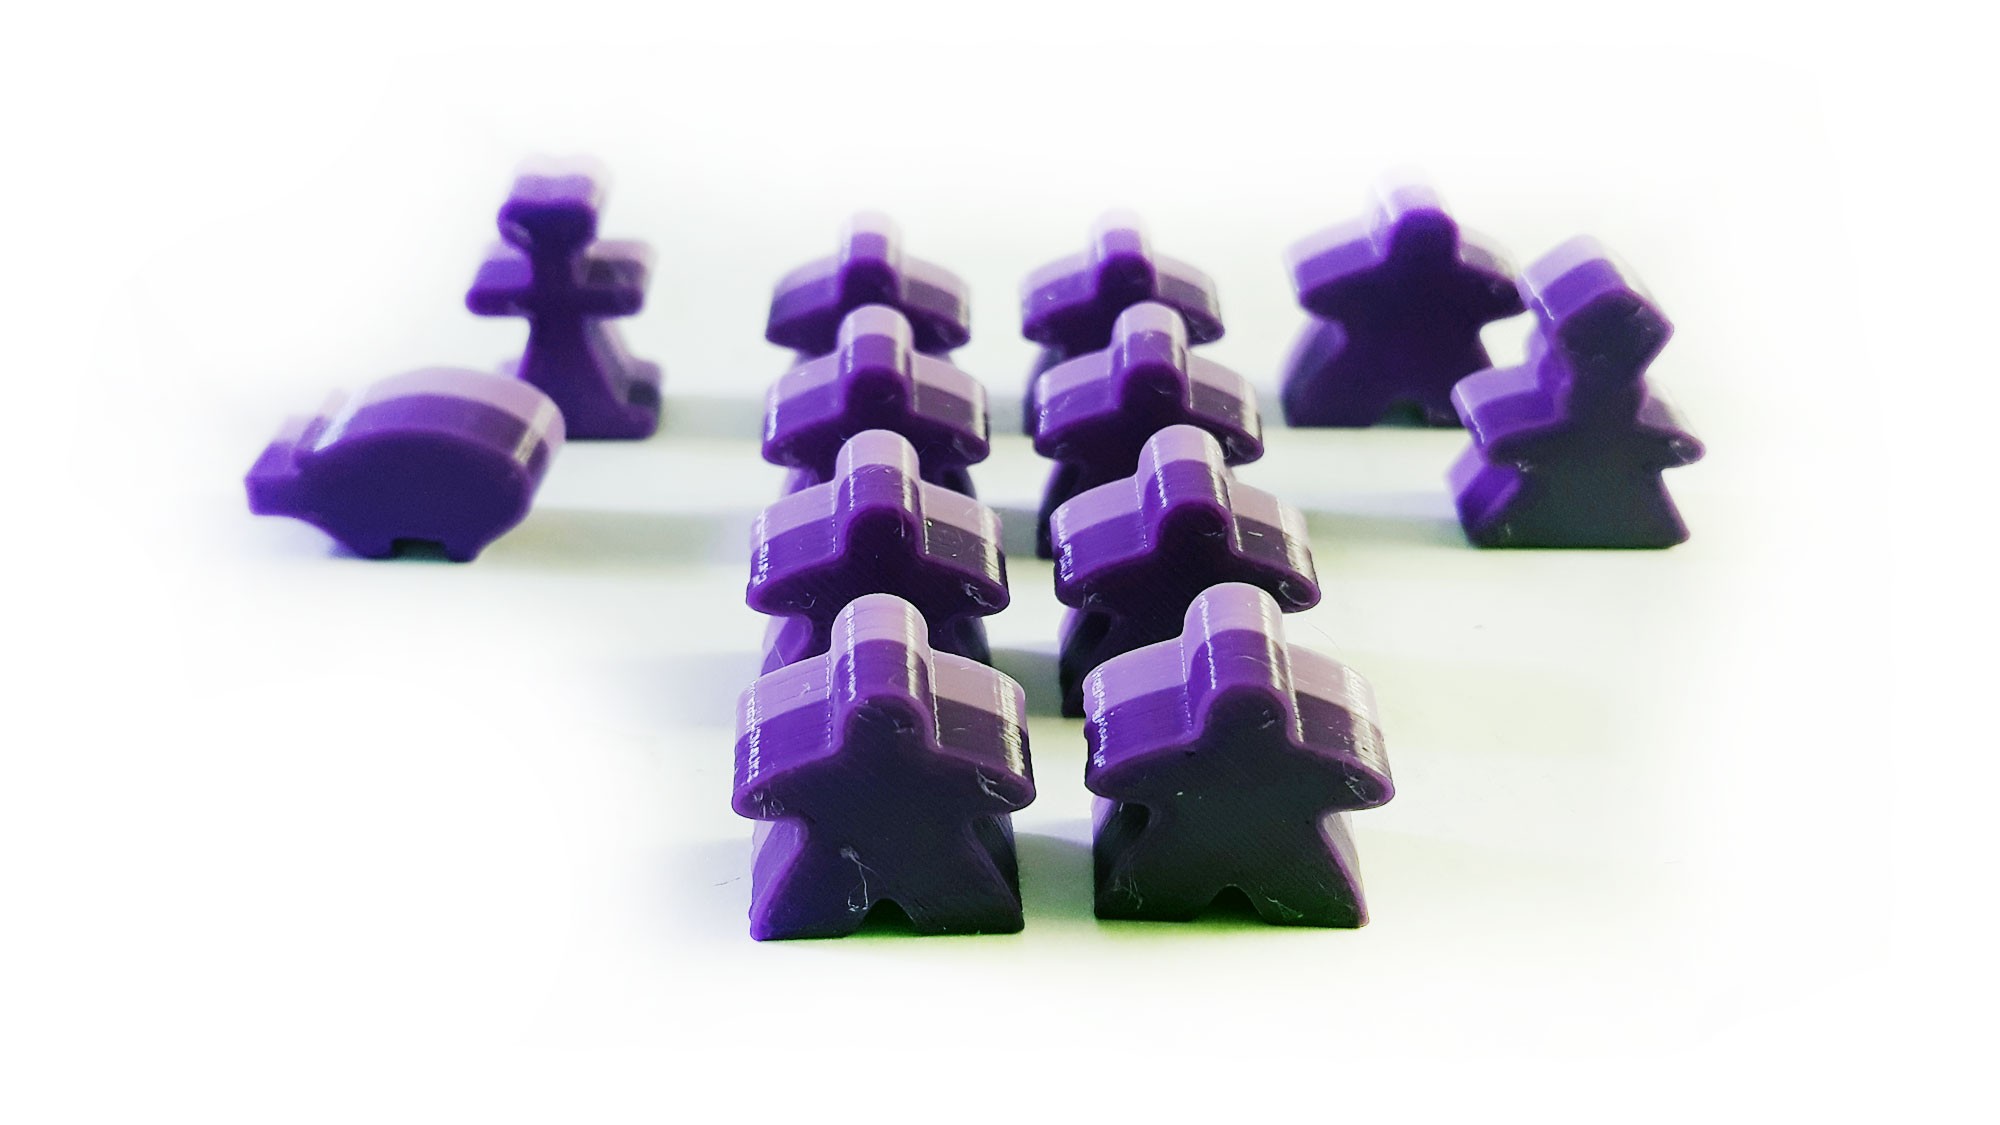 3d printed Carcassonne meeples 1 abbot or abbot pack all colors 8 meeples 